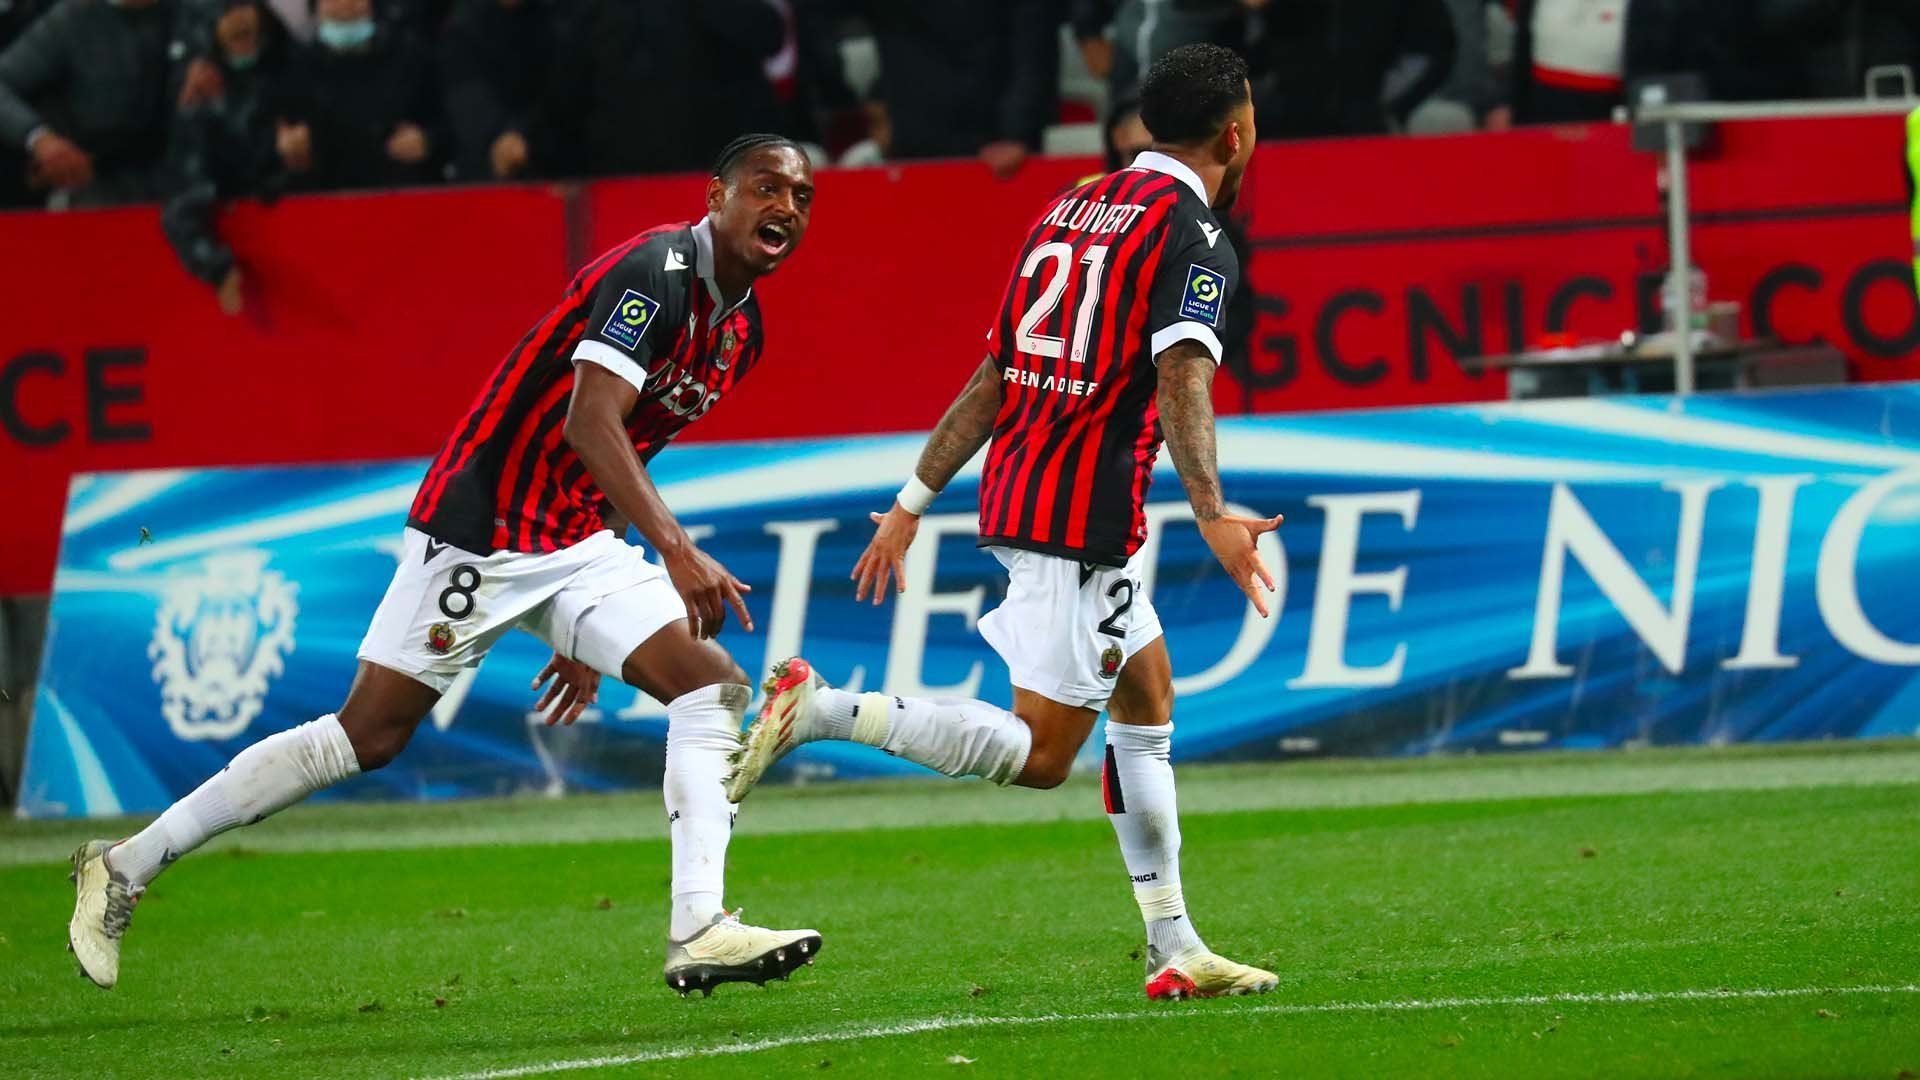 Nice will face Clermont on Sunday - Ligue 1